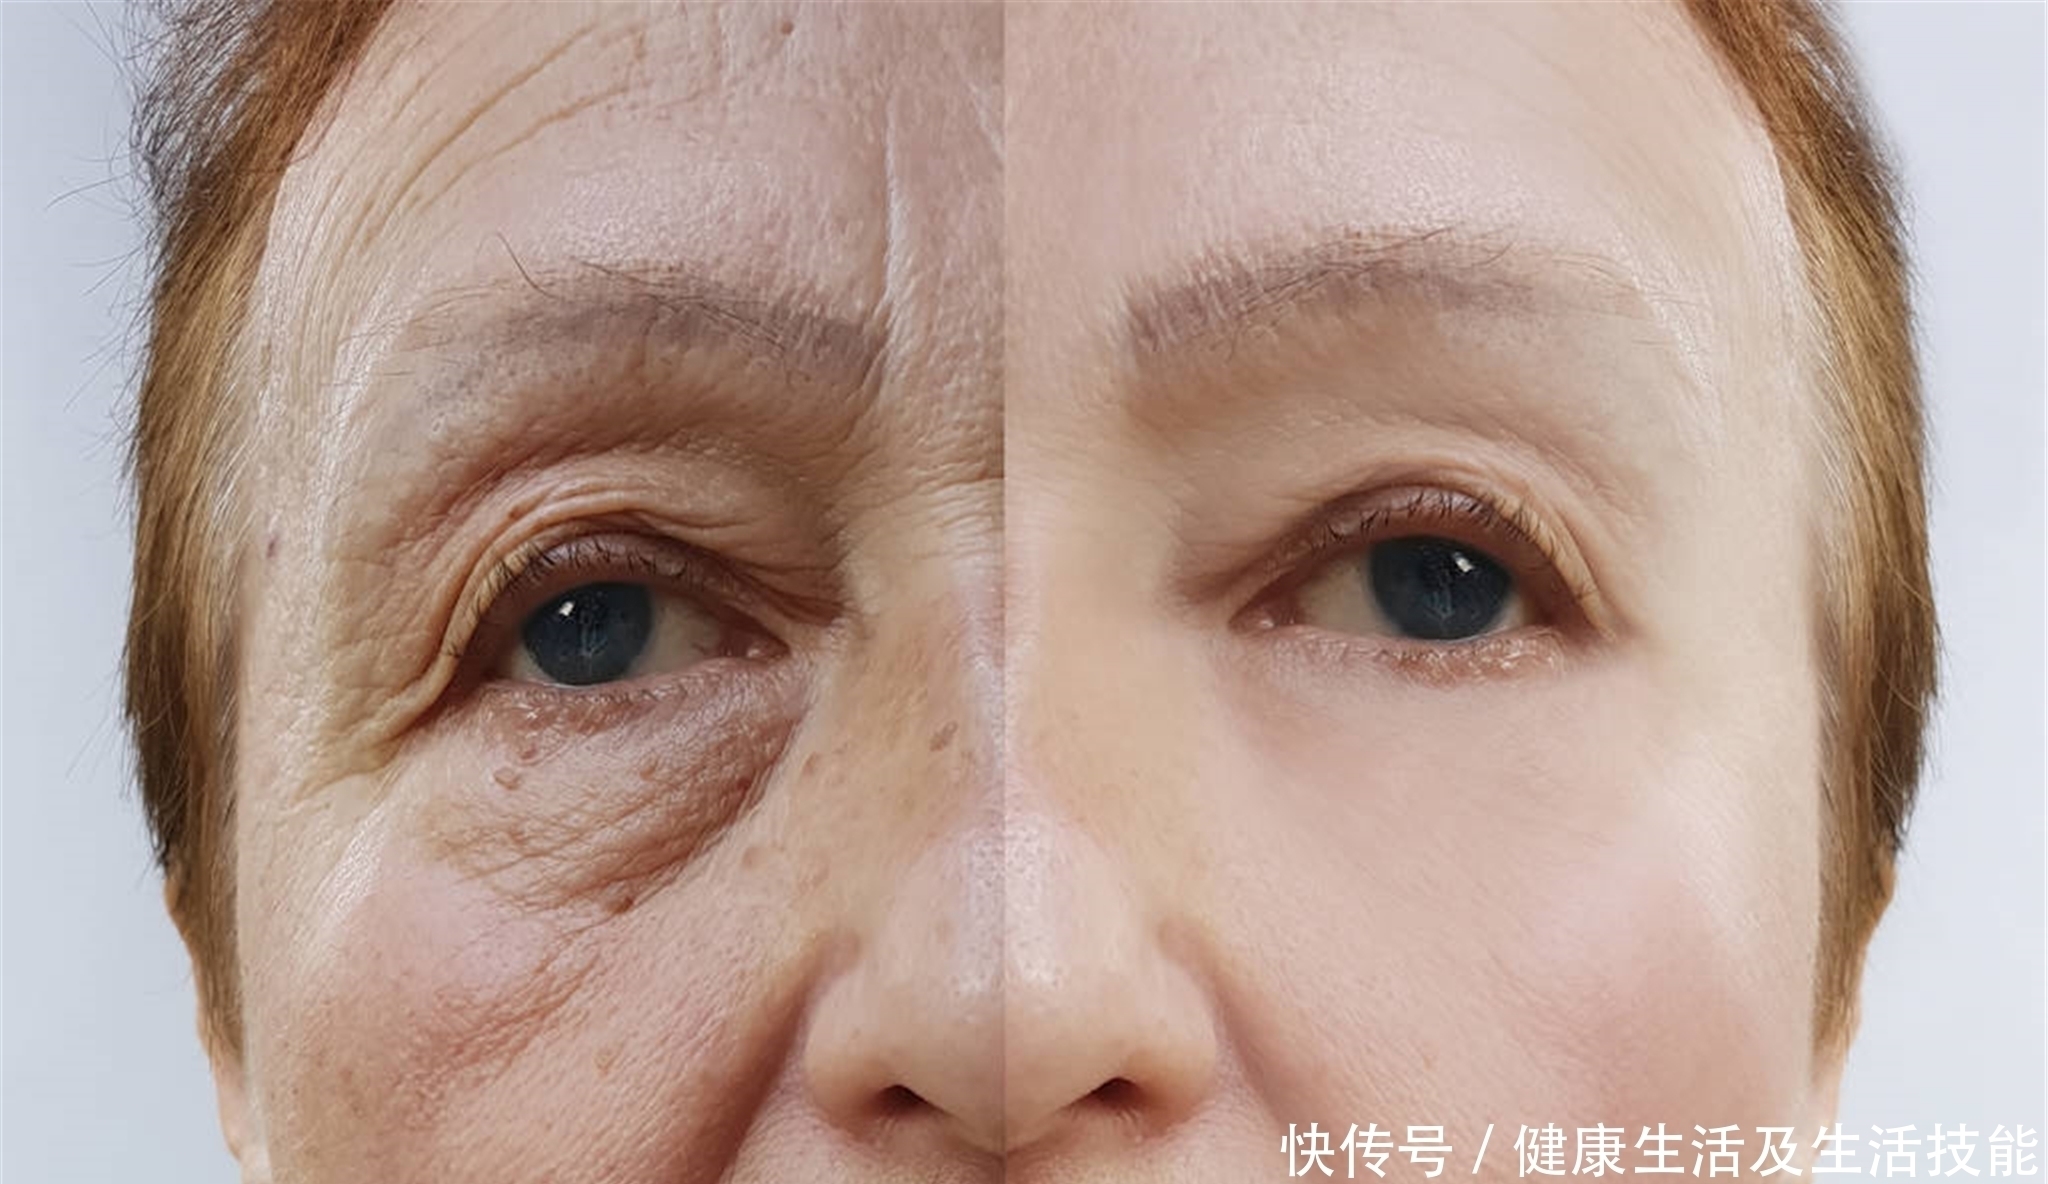 Asian elderly woman face and eye with wrinkles, portrait closeup view ...